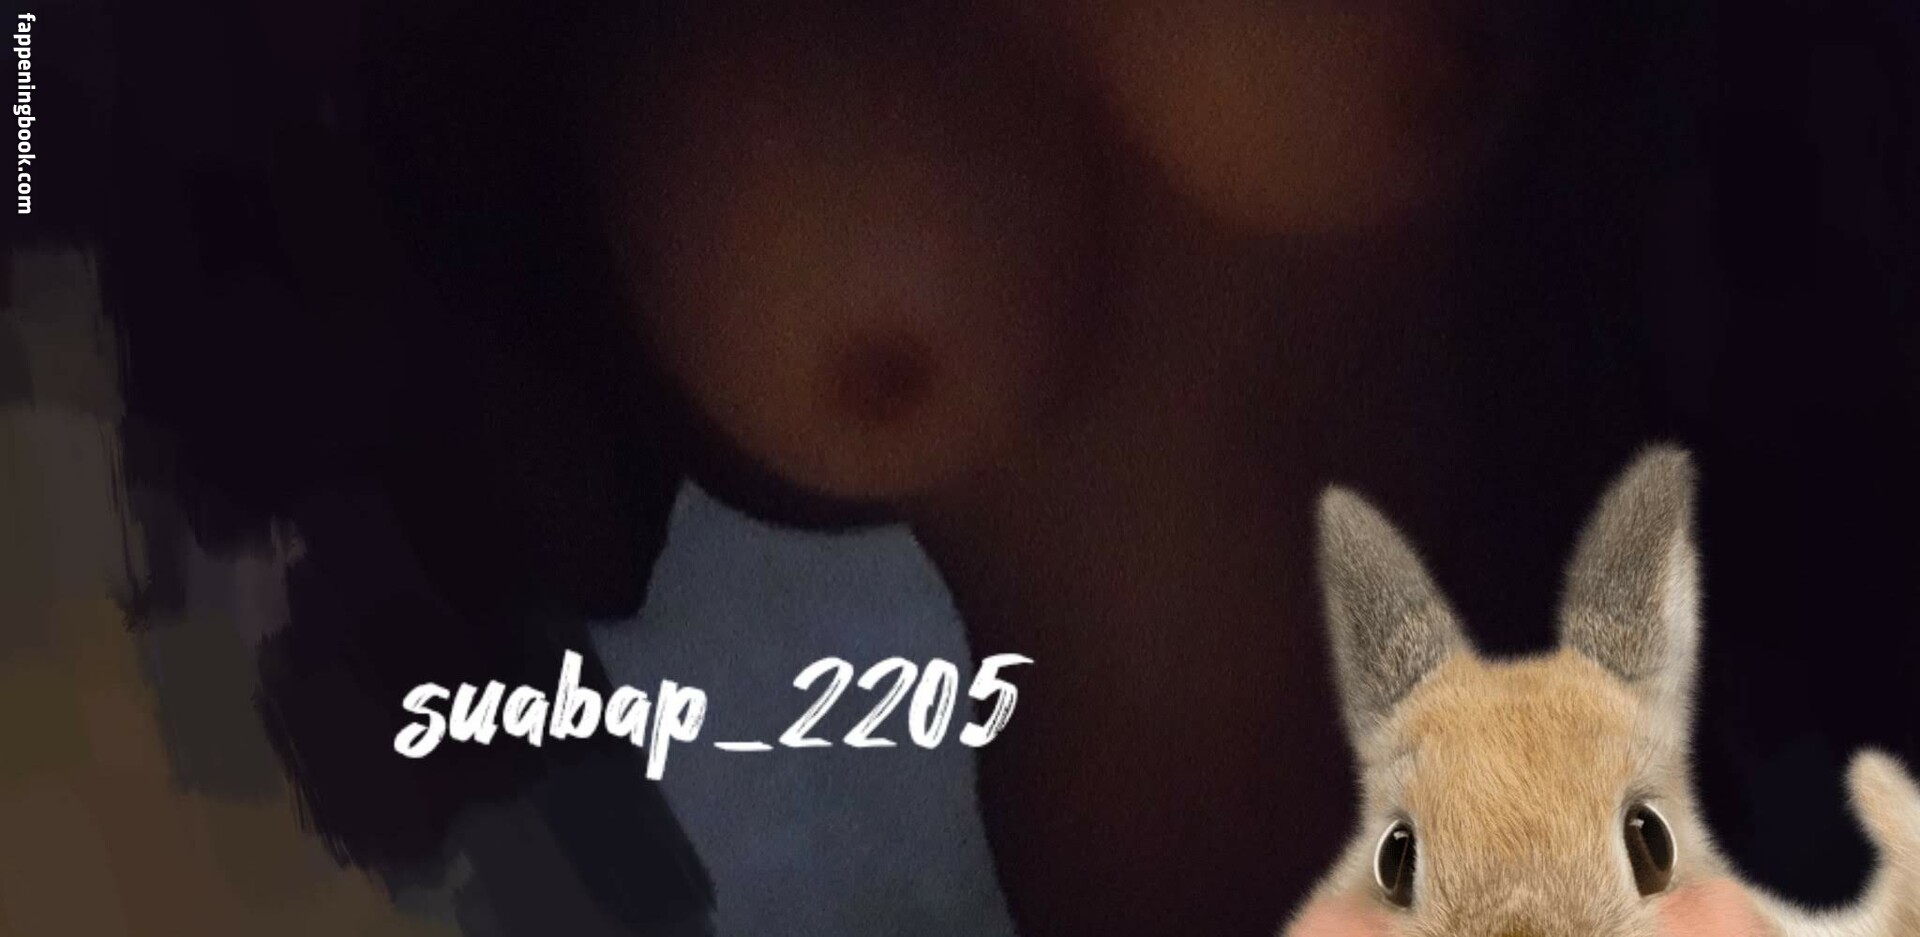 suabap_2205 Nude